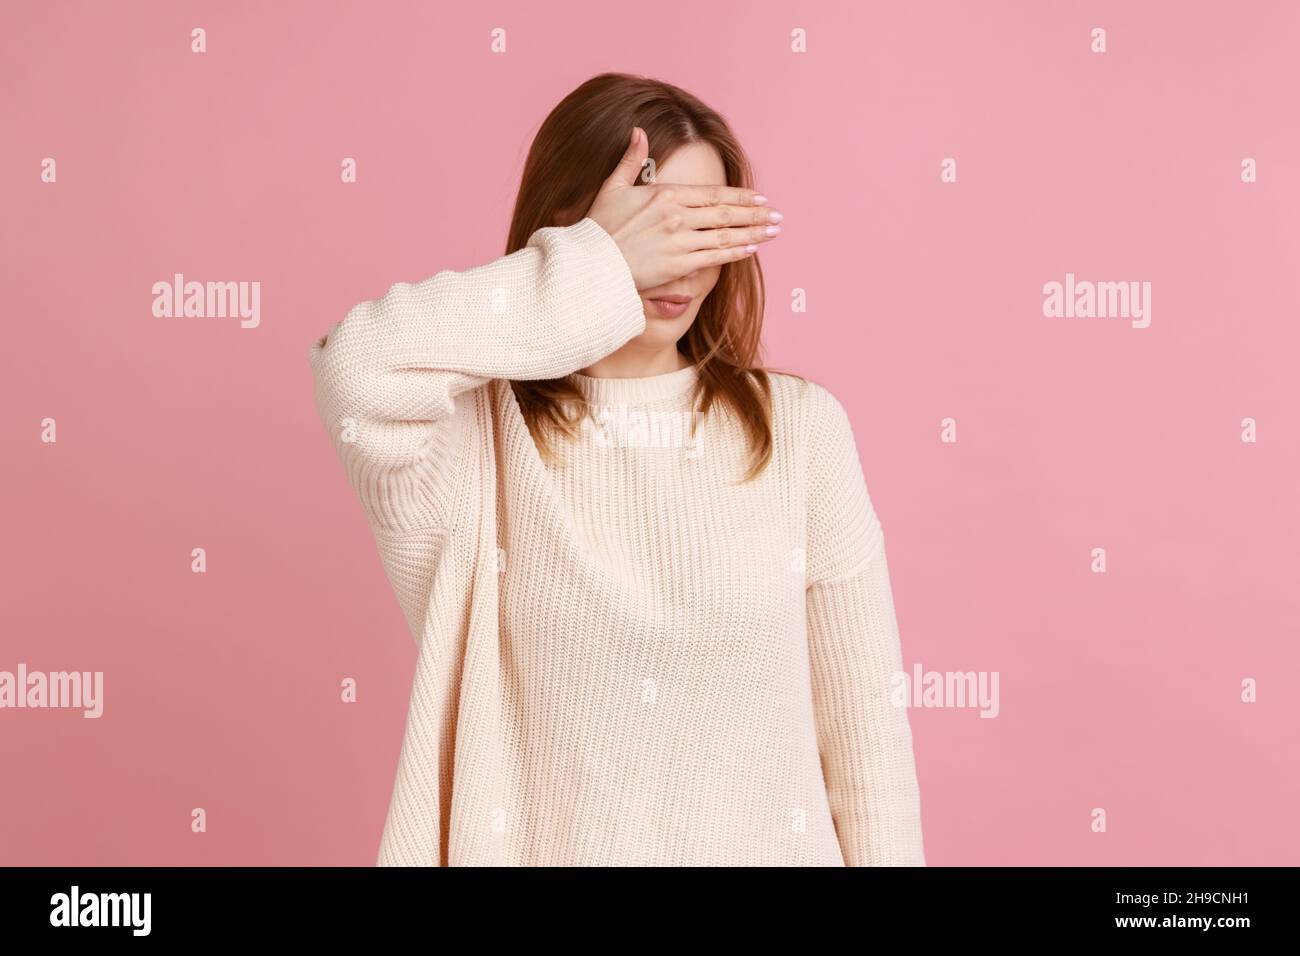 Portrait of ashamed confused attractive blond woman closing eyes with hand, hiding, ignoring dont want to see, wearing white sweater. Indoor studio shot isolated on pink background. Stock Photo